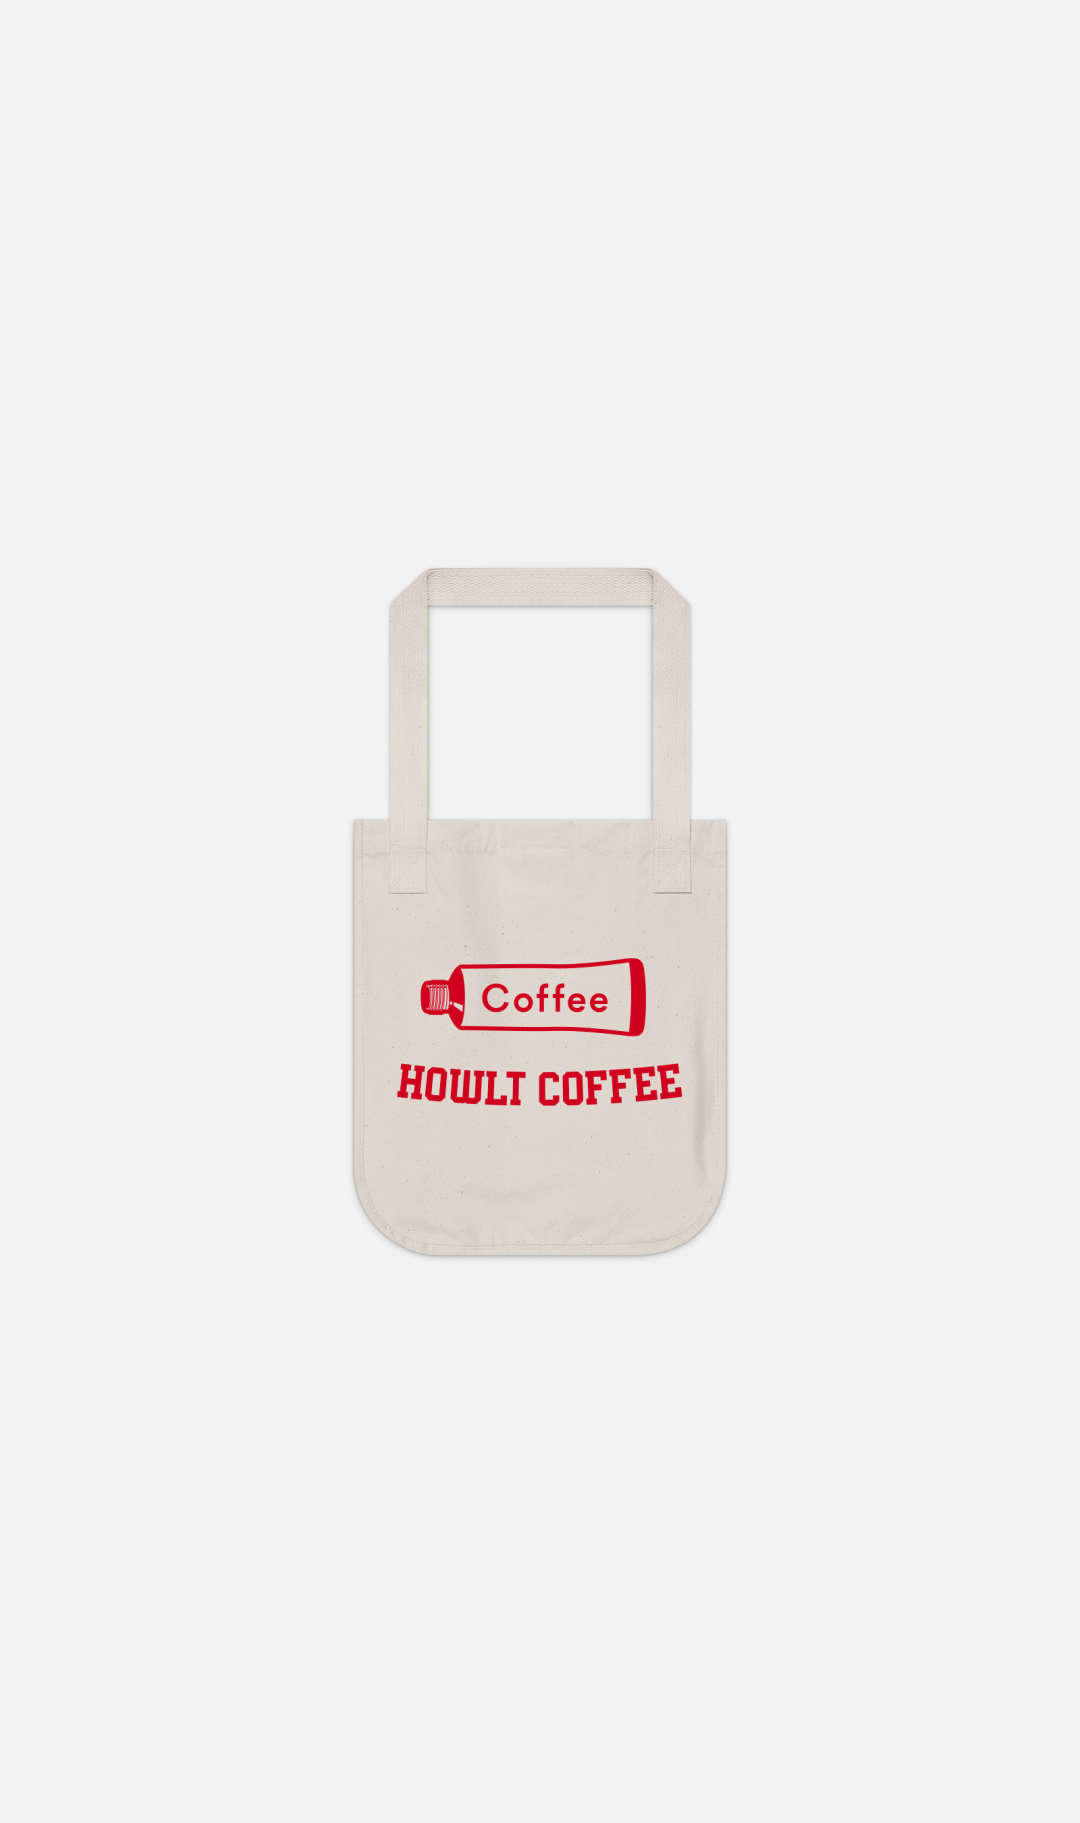 But First Coffee Design Customized Tote Bags - Logo Tote Bags Two Tone